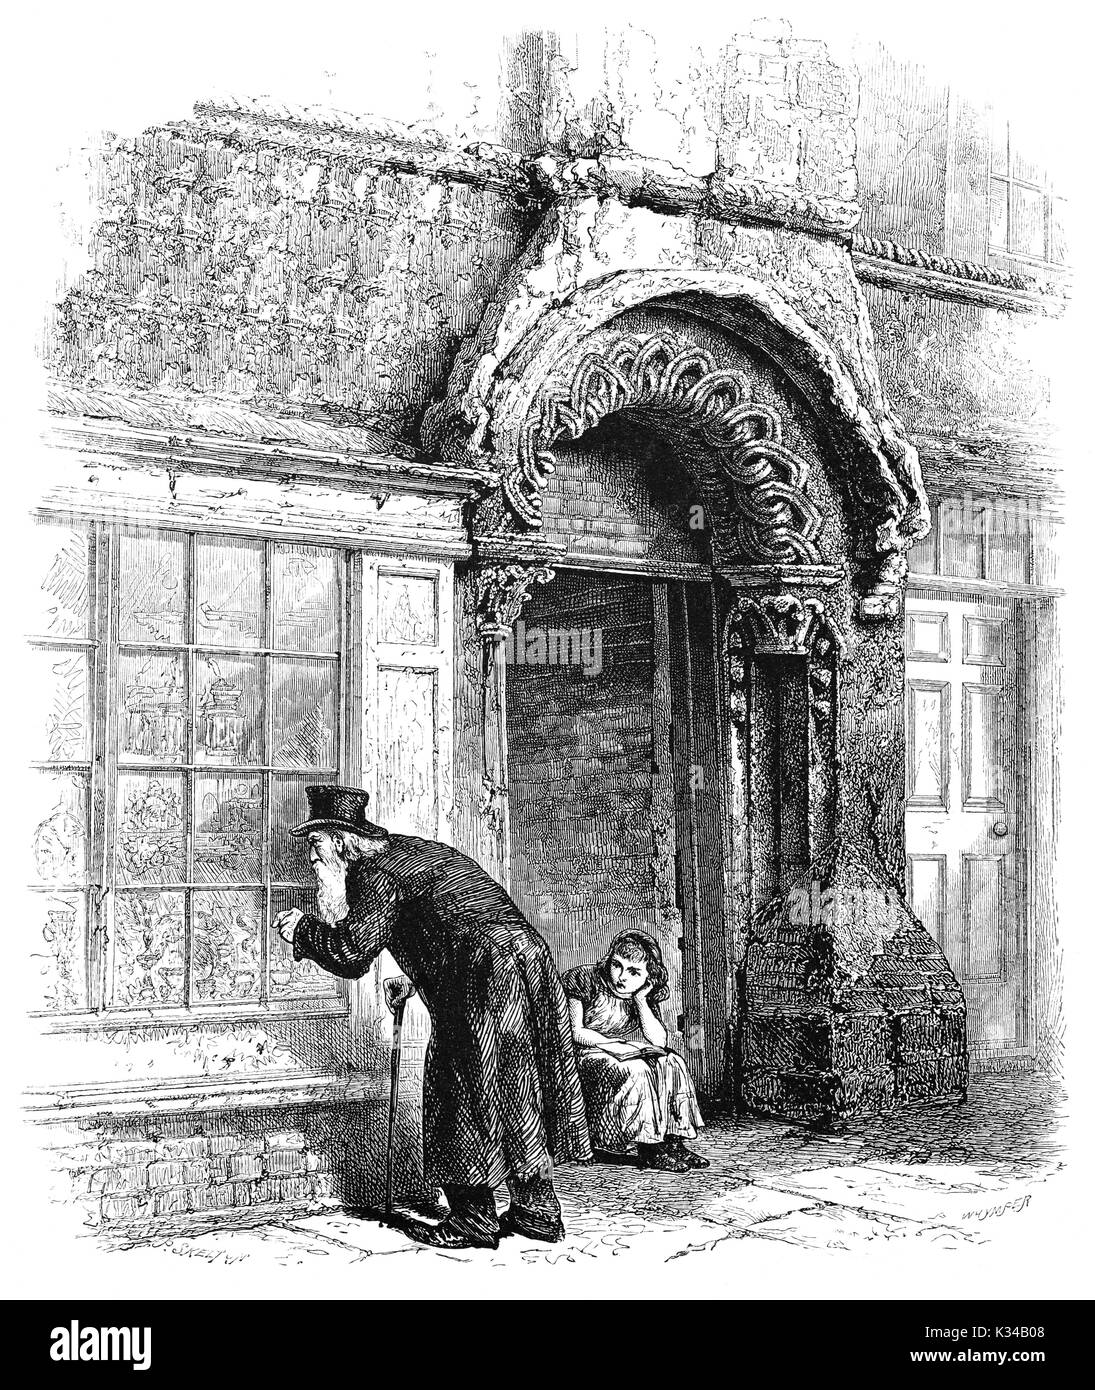 1870: An old man peering through the window of the Jew's House, built in the 12th Century one of the earliest extant town houses in England. It is situated on Steep Hill in Lincoln, immediately below Jew's Court.  The house has traditionally been associated with the thriving Jewish community in Medieval Lincoln. Following Anti-Semitic hysteria in the 13th Century the entire Jewish community was expelled from England, and the Jew's House was supposedly being seized from a Jewish owner. Lincolnshire, England Stock Photo